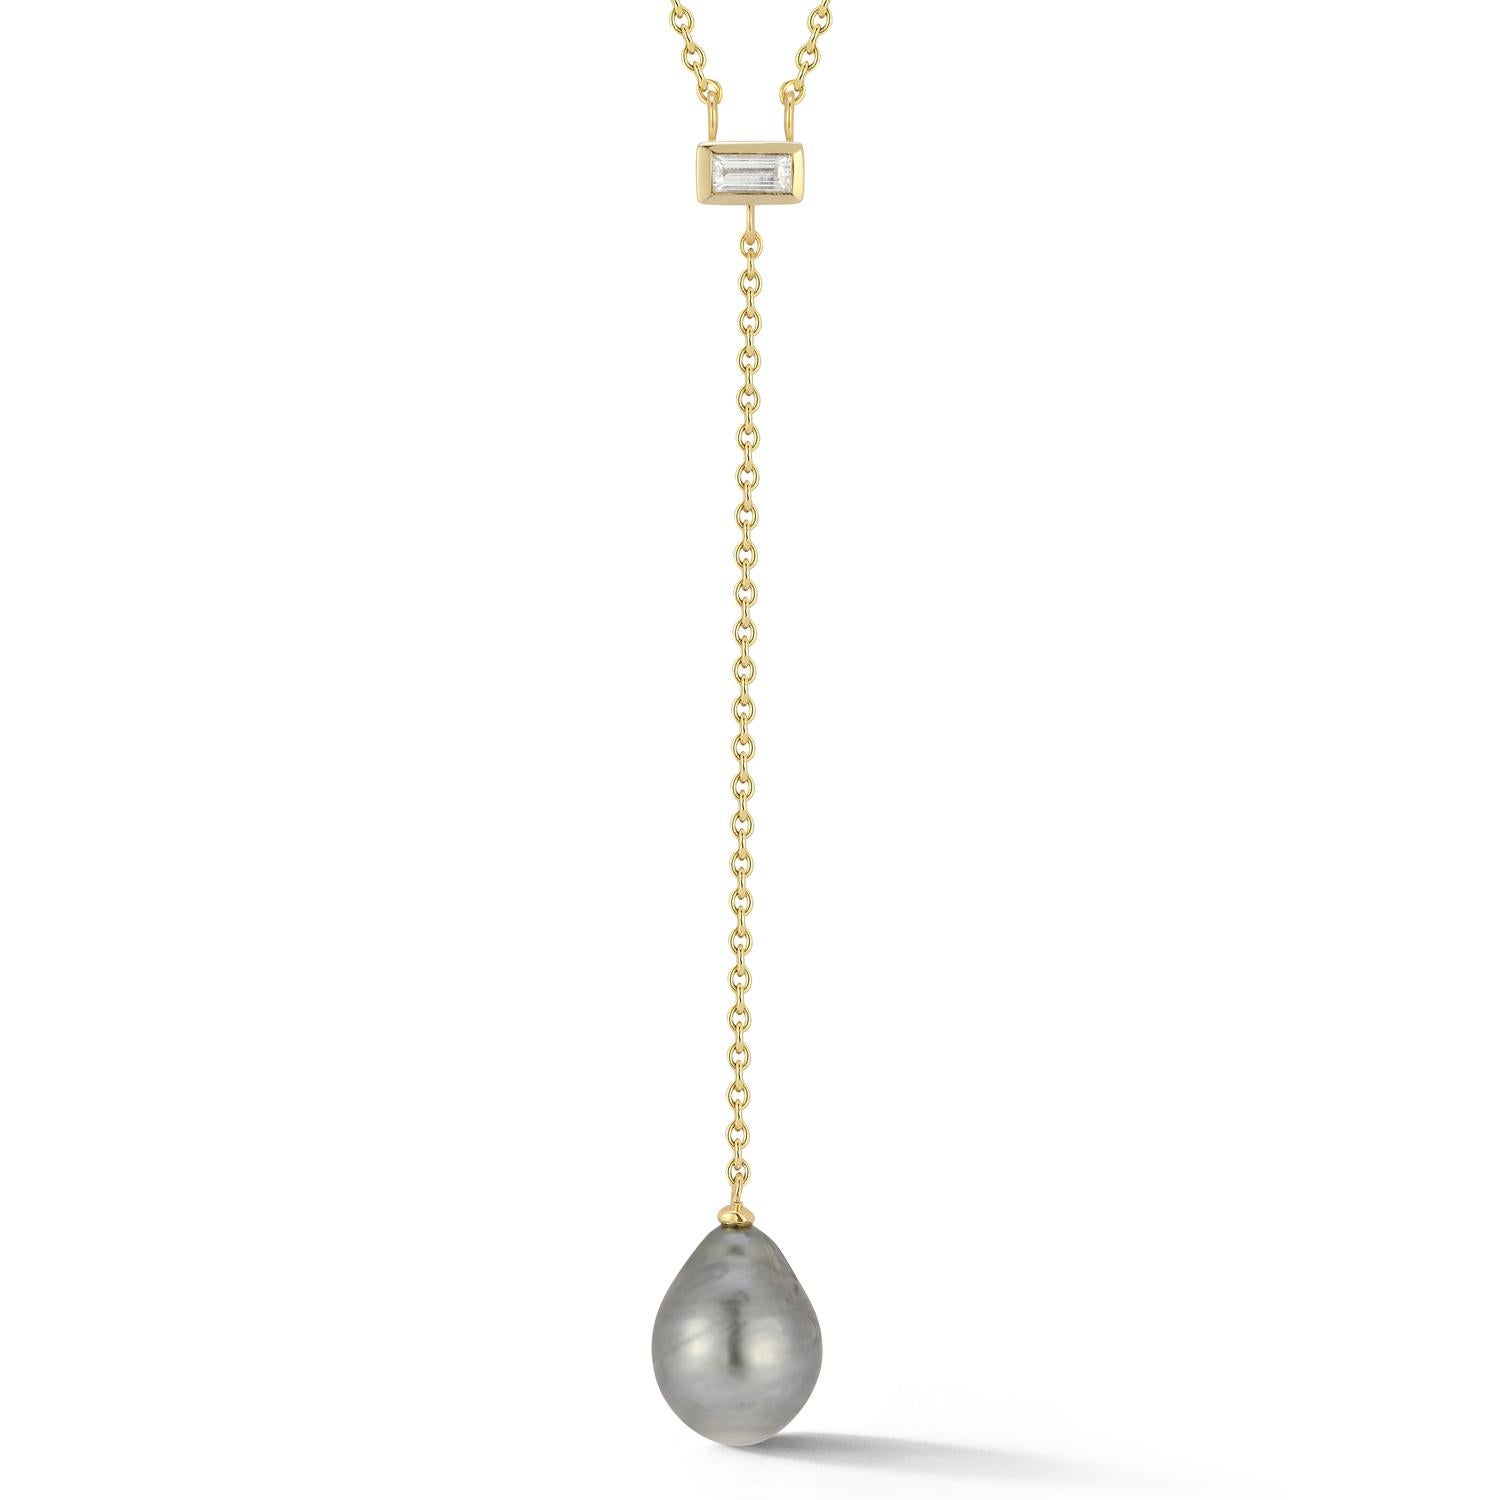 Simple and sophisticated Y necklace with lustrous Tahitian pearl by Hi June Parker. The baroque shape Tahitian Pearl drops from a VS1 baguette diamond at the center of the necklace. Wear it with a v-shape neckline or a button down shirt to enhance